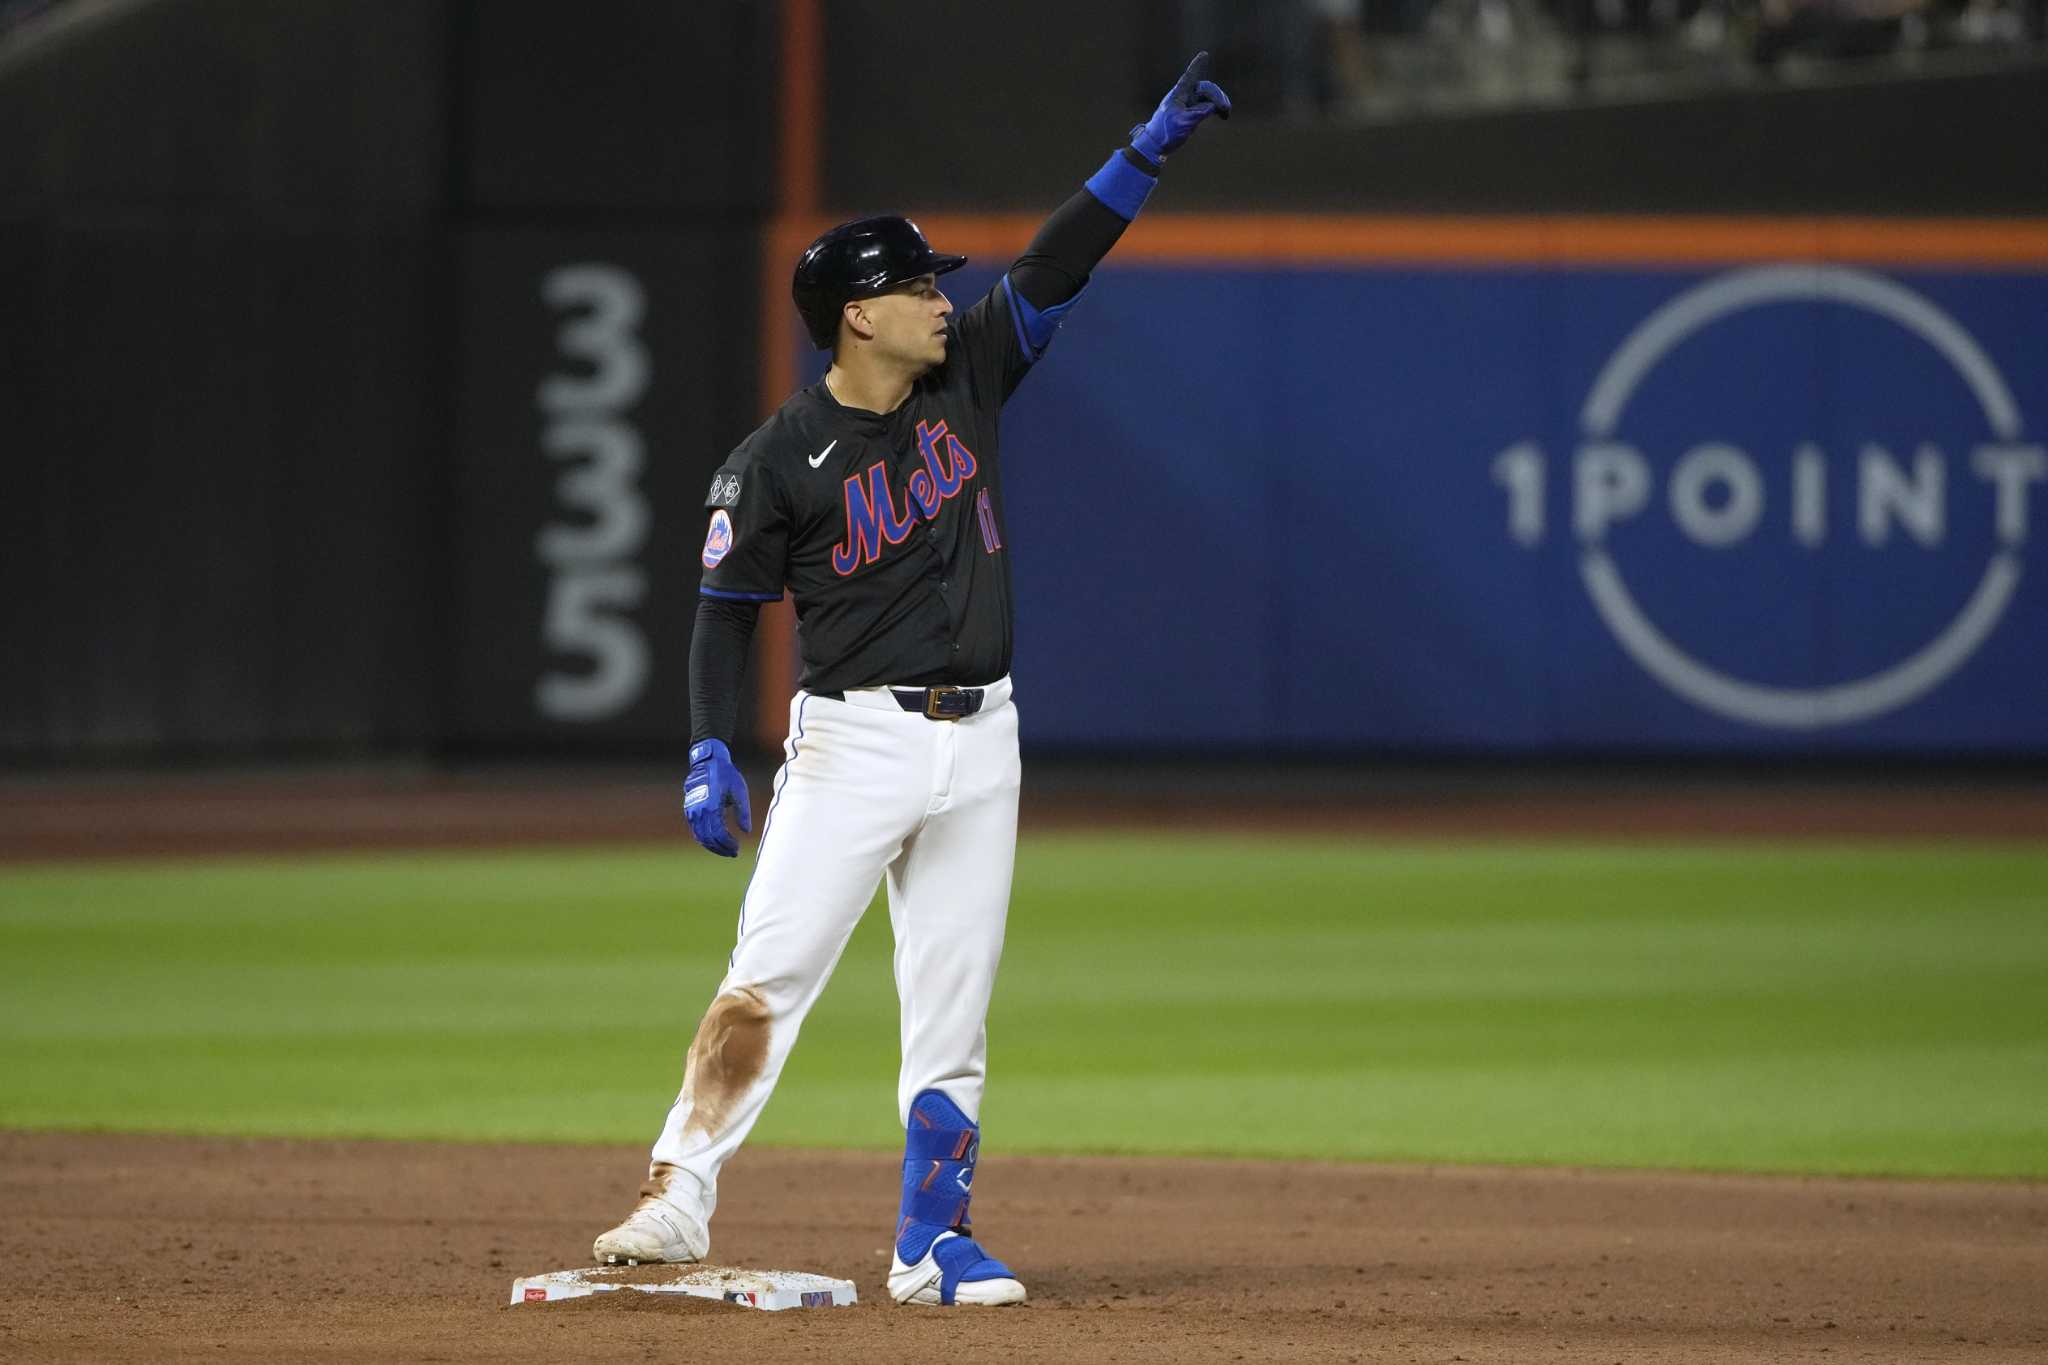 Jose Iglesias' latest big hit lifts Mets to 6-2 win over Nationals